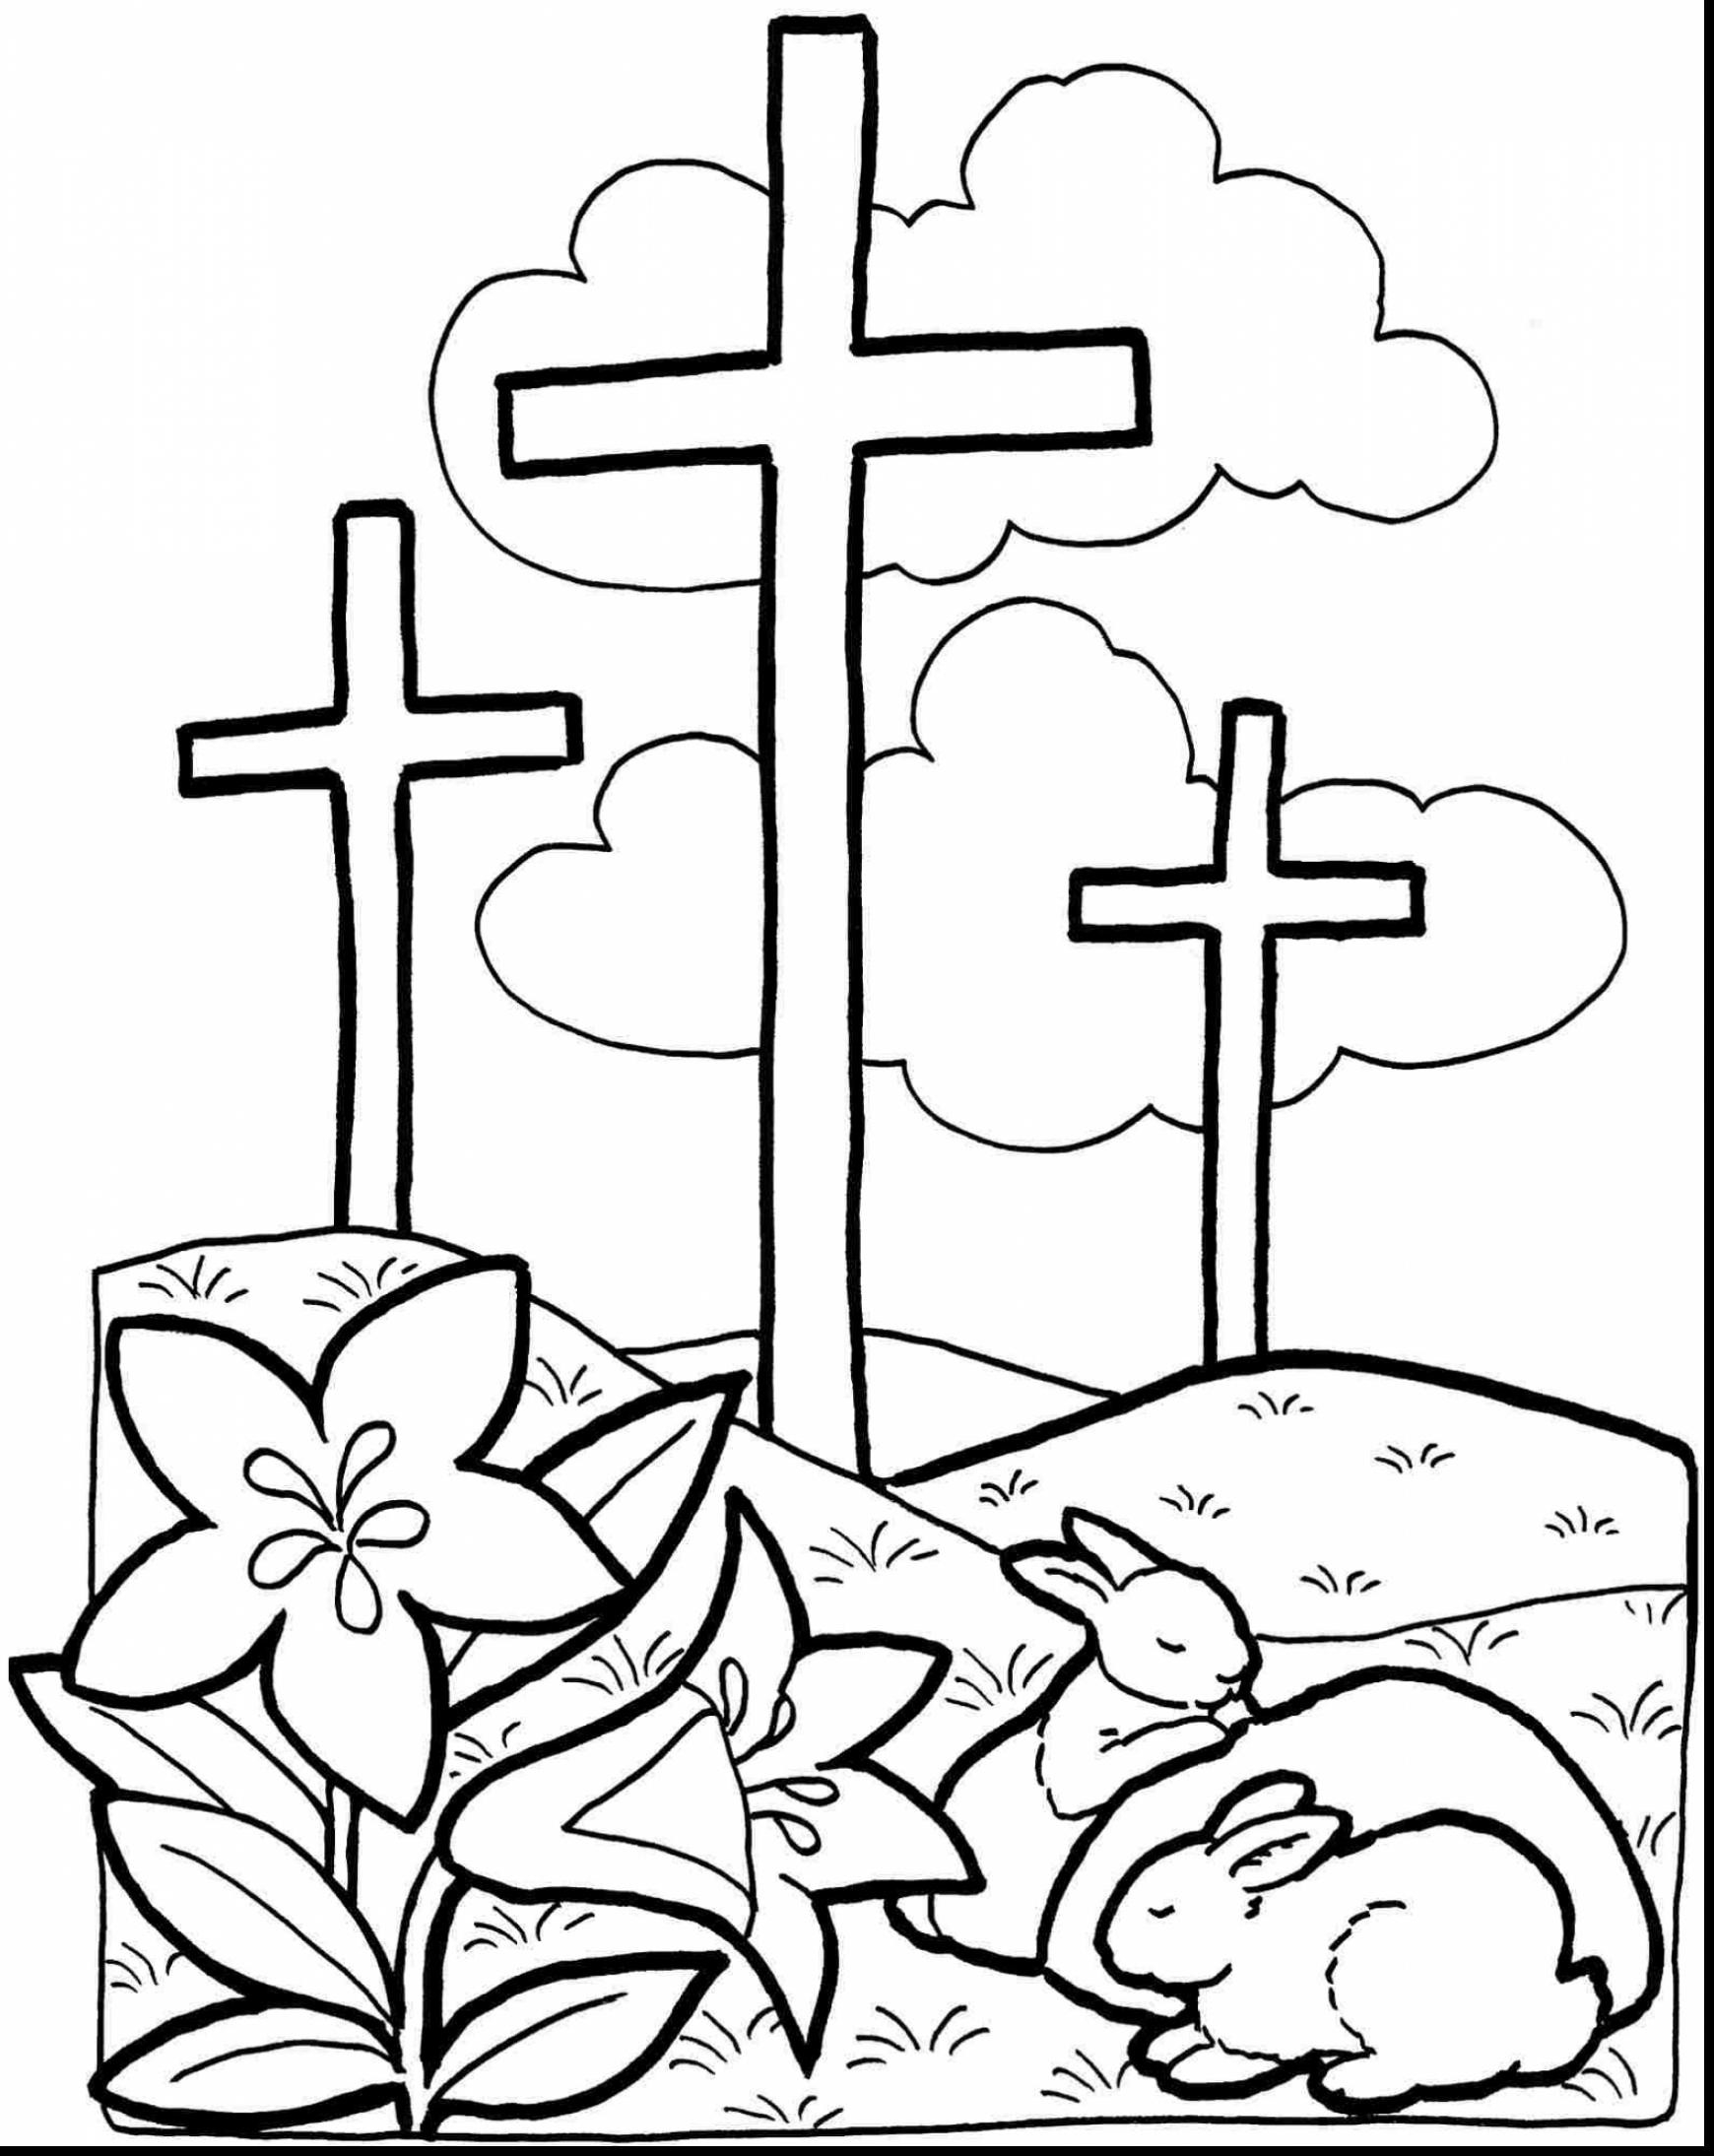 Religious Coloring Pages For Kids Images Of Free Religious Easter Coloring Pages Sabadaphnecottage